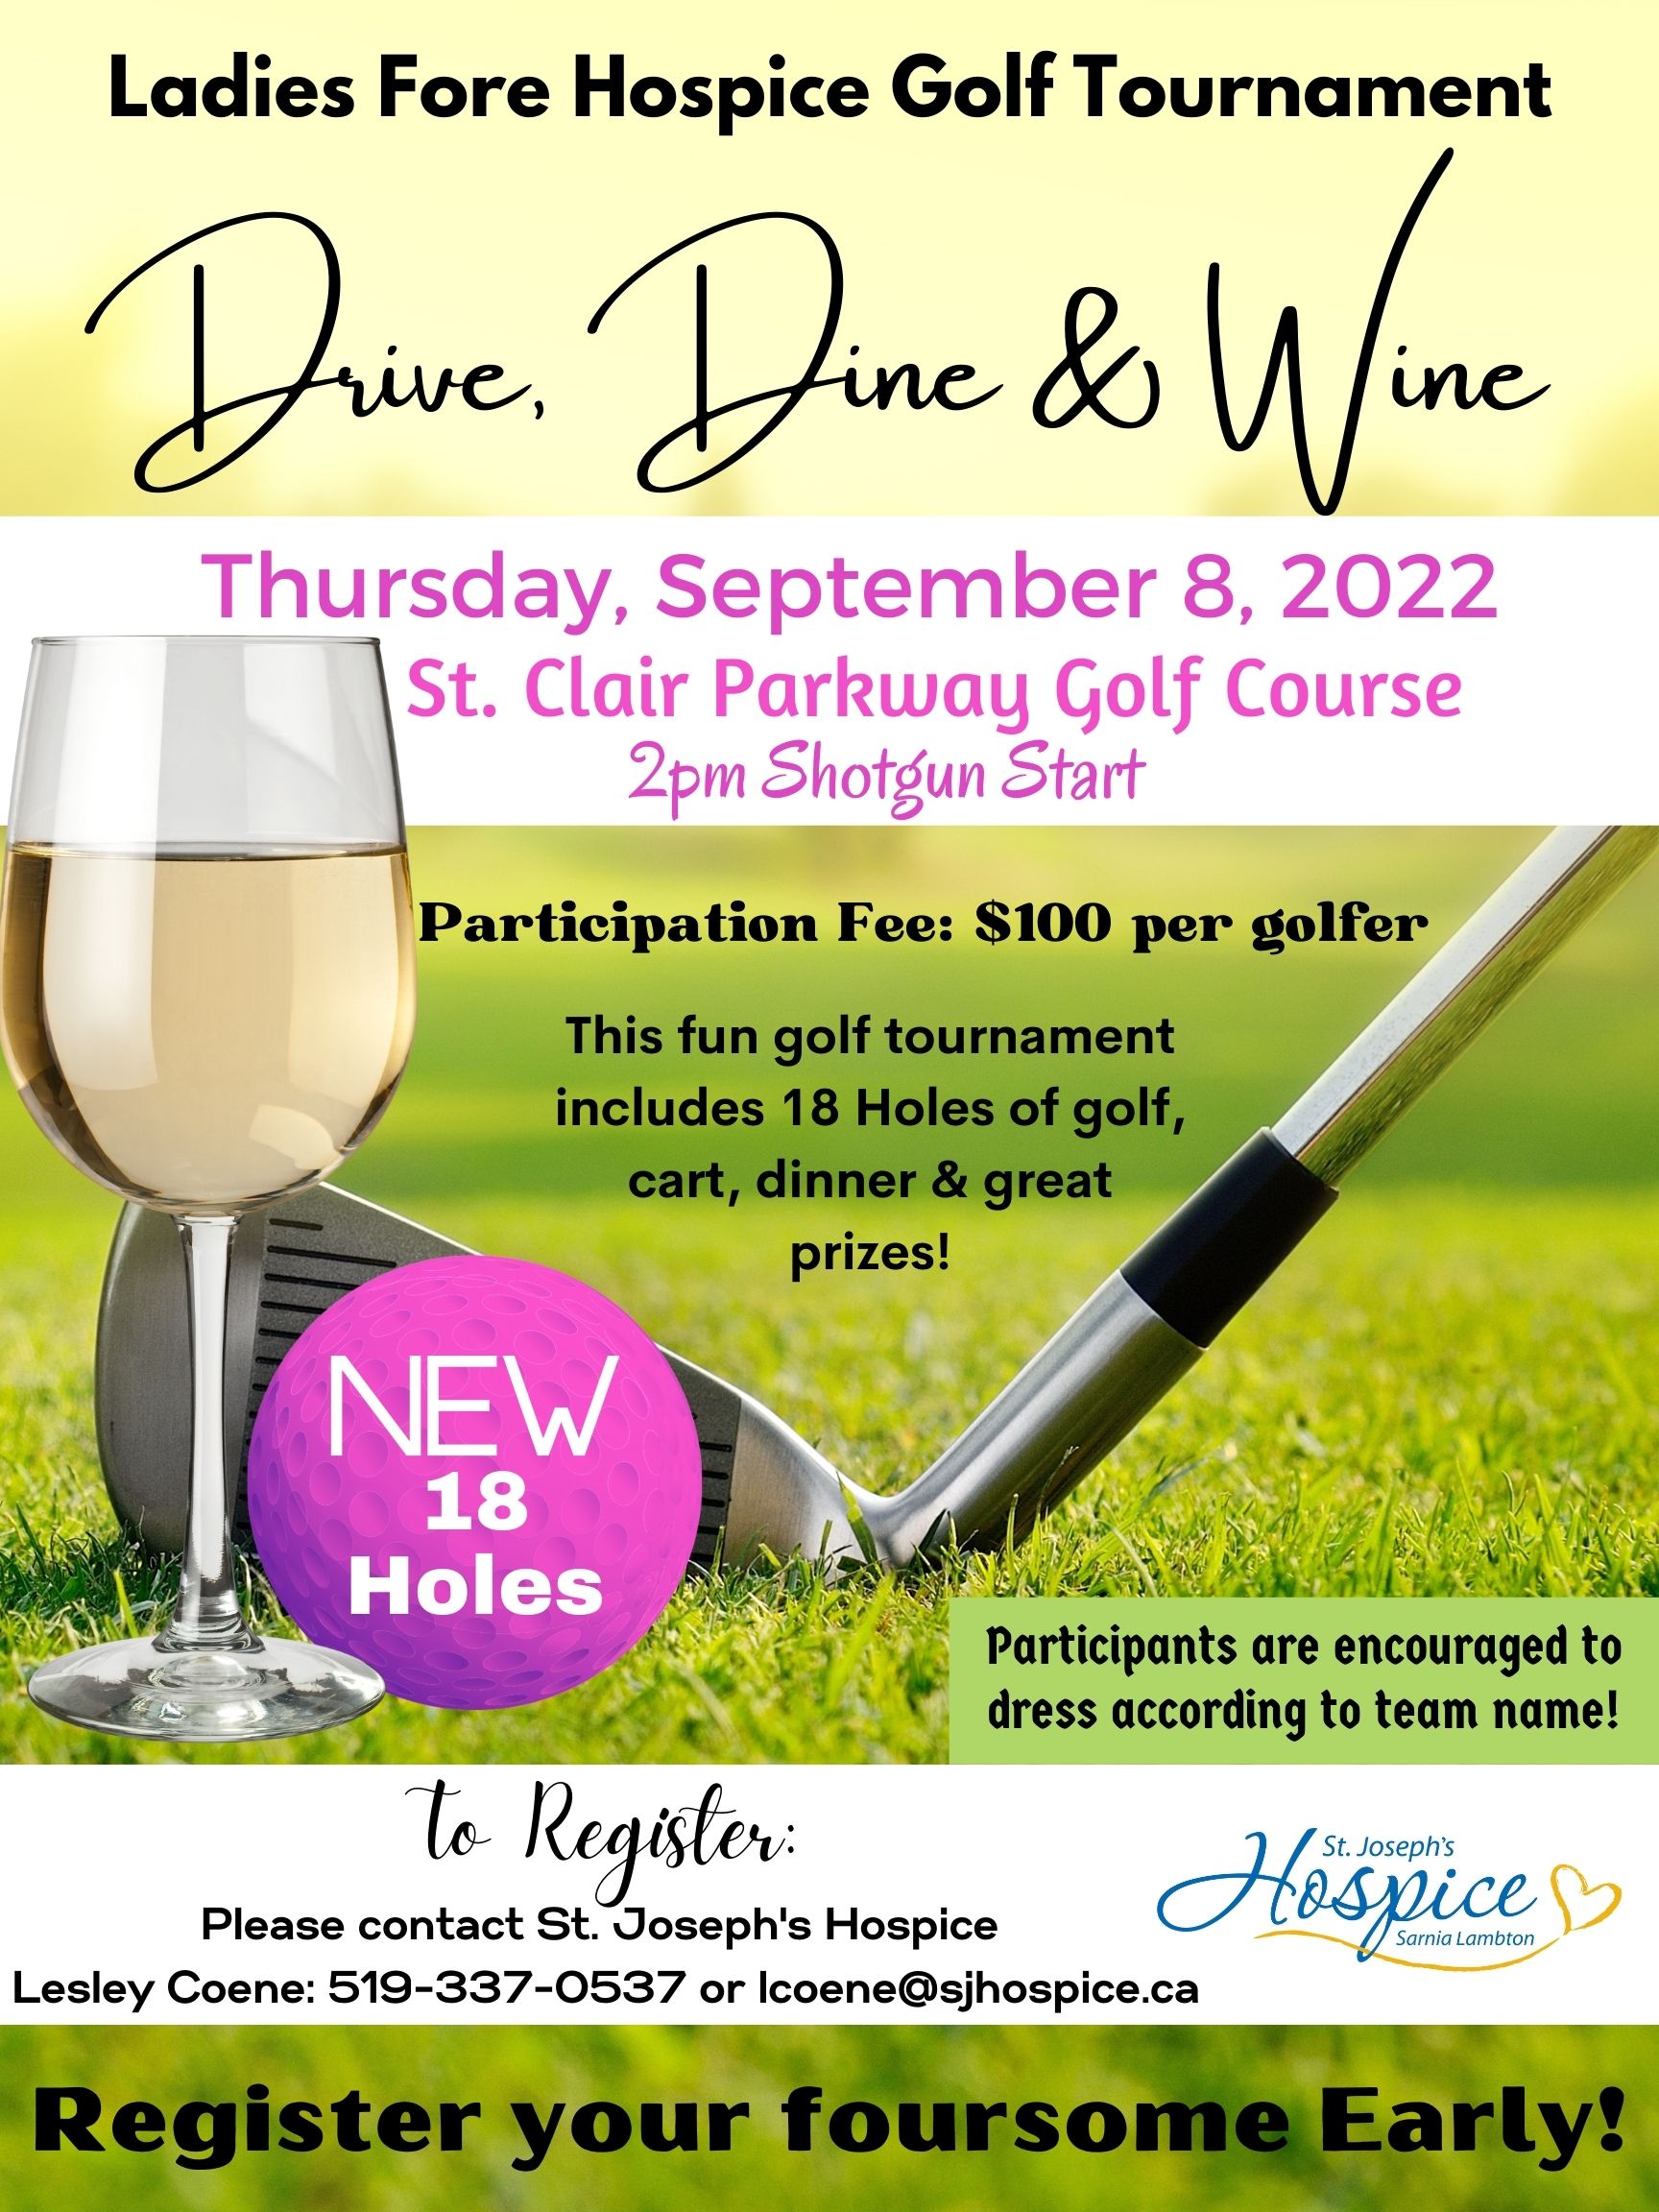 Ladies Fore Hospice Golf Tournament